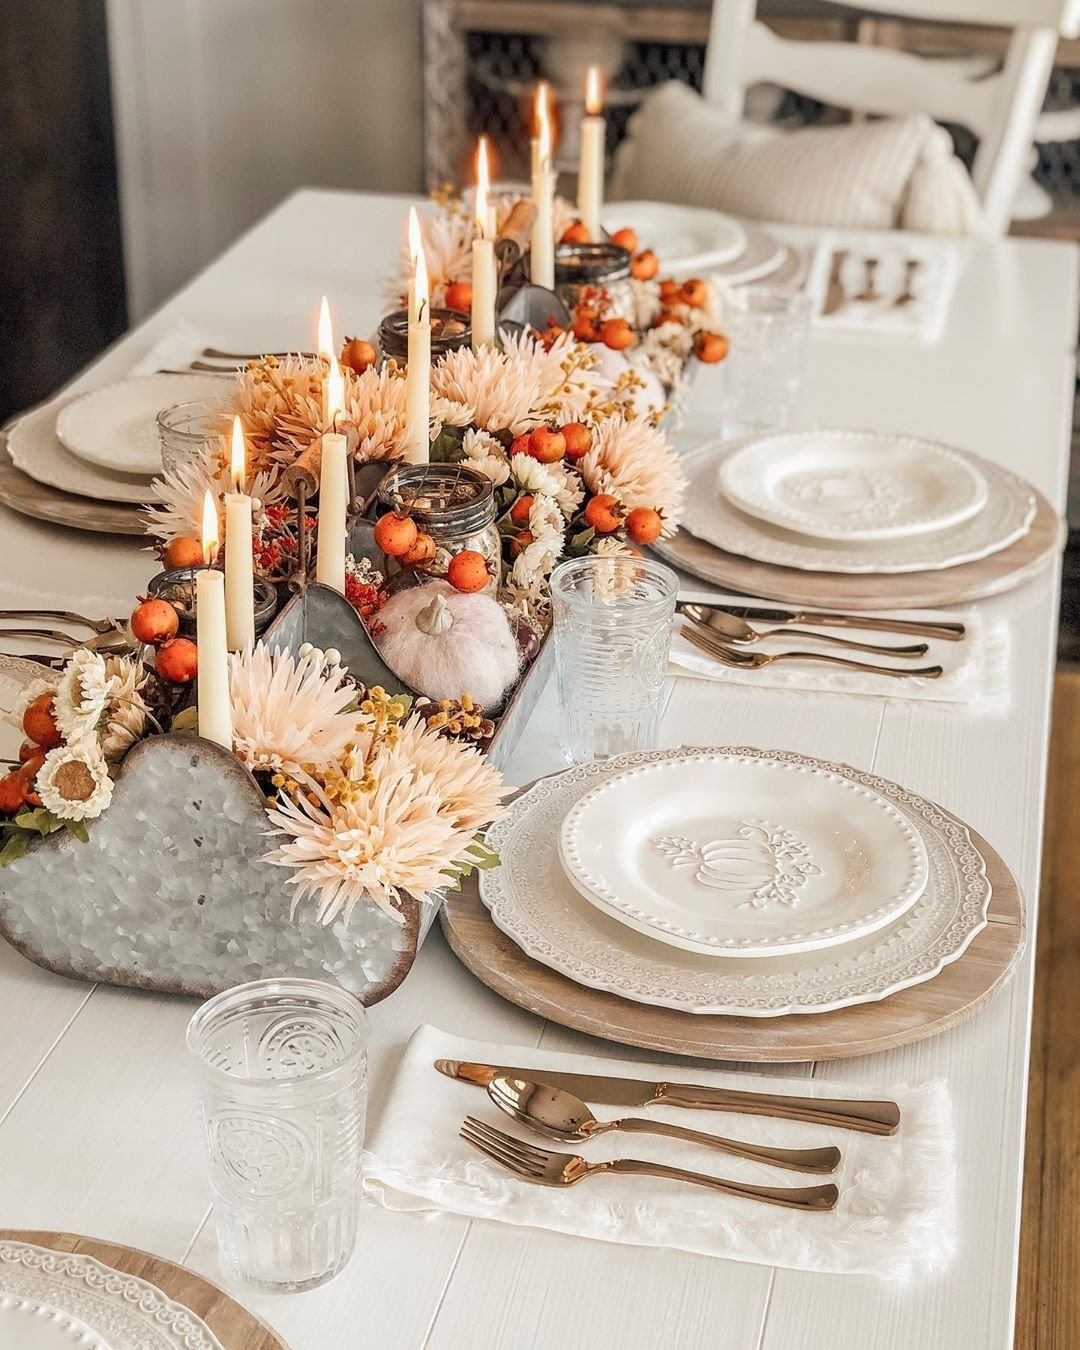 Fresh Thanksgiving Table Decor Ideas Featured On Instagram